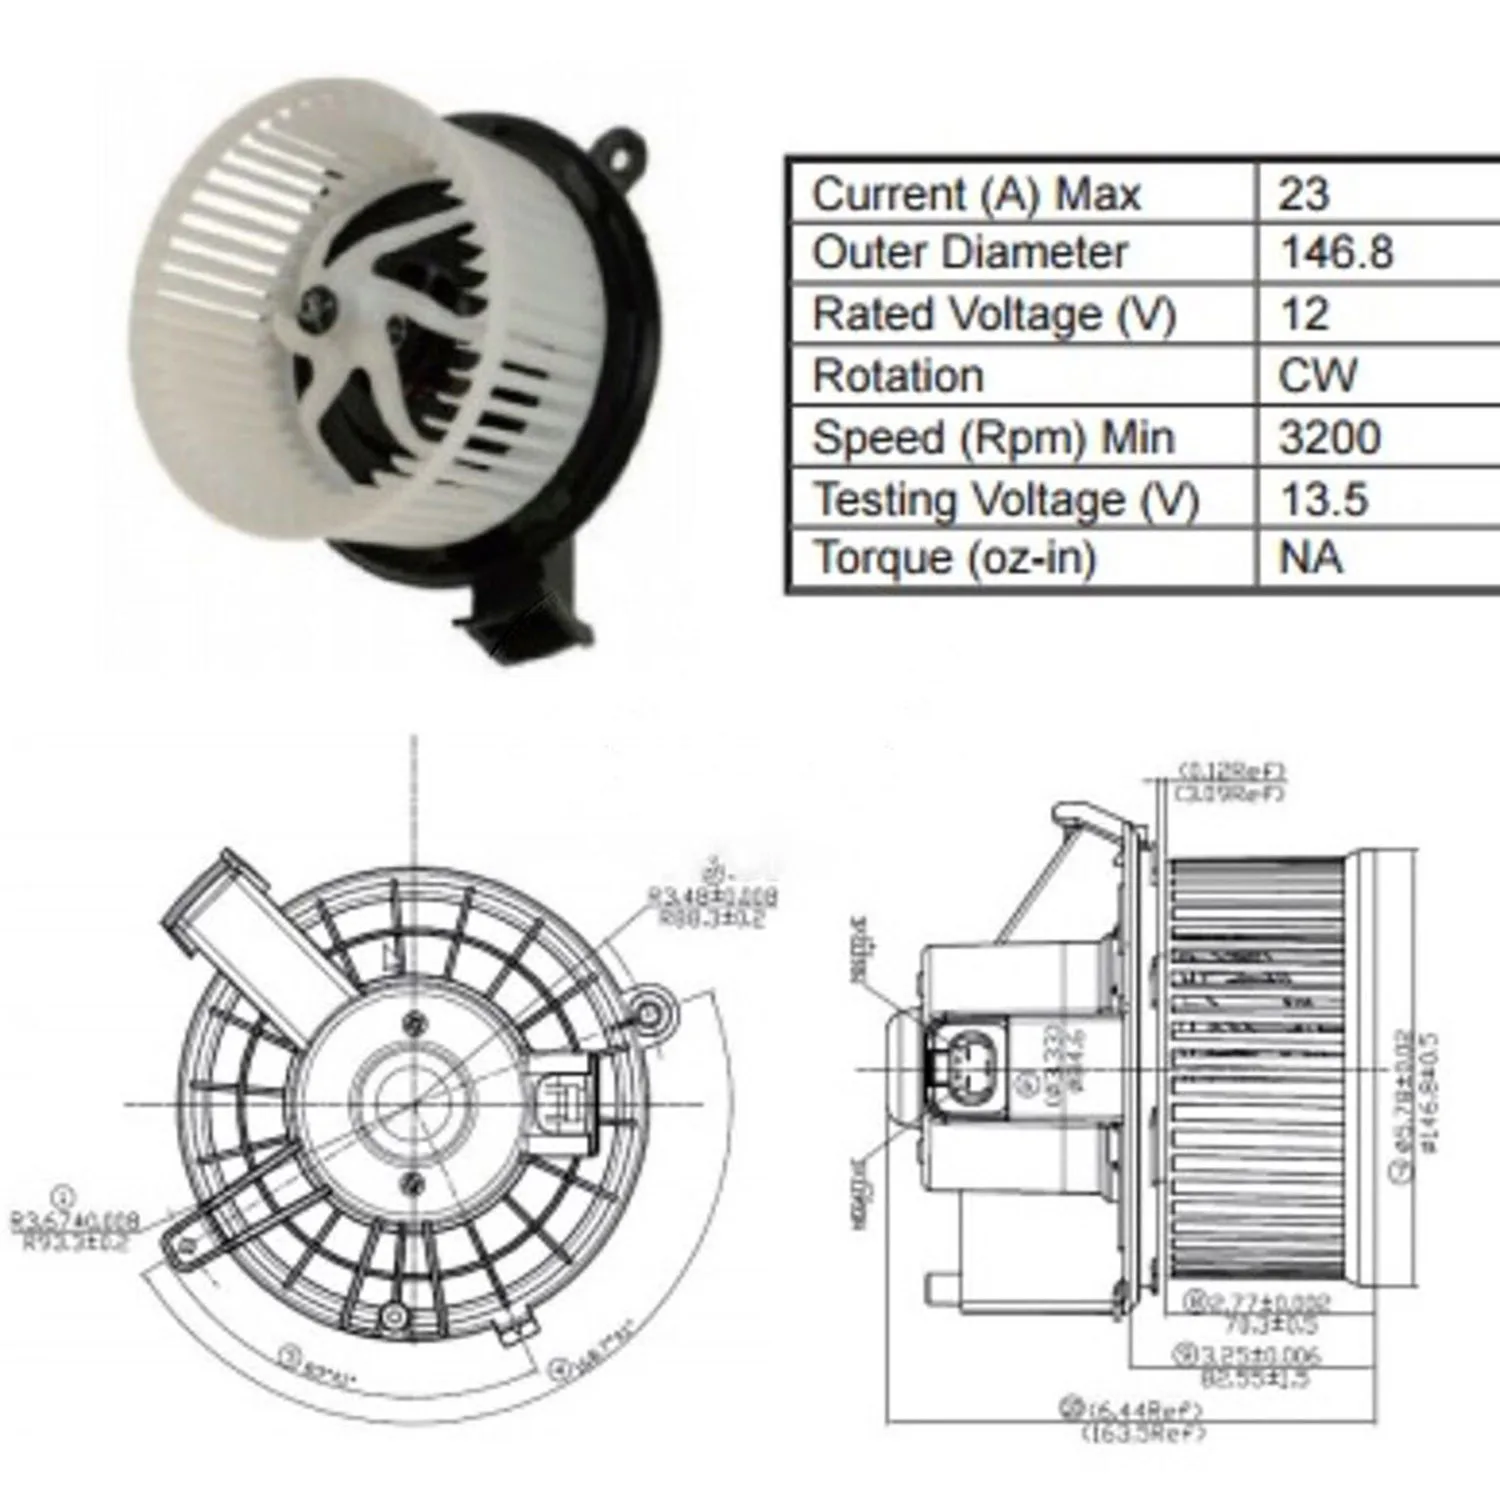 

Air Conditioning Fan AC A/C Blower Motor FOR ISZ 12V MZZ0074 20907444 22810567 22961461 25786437 25941468